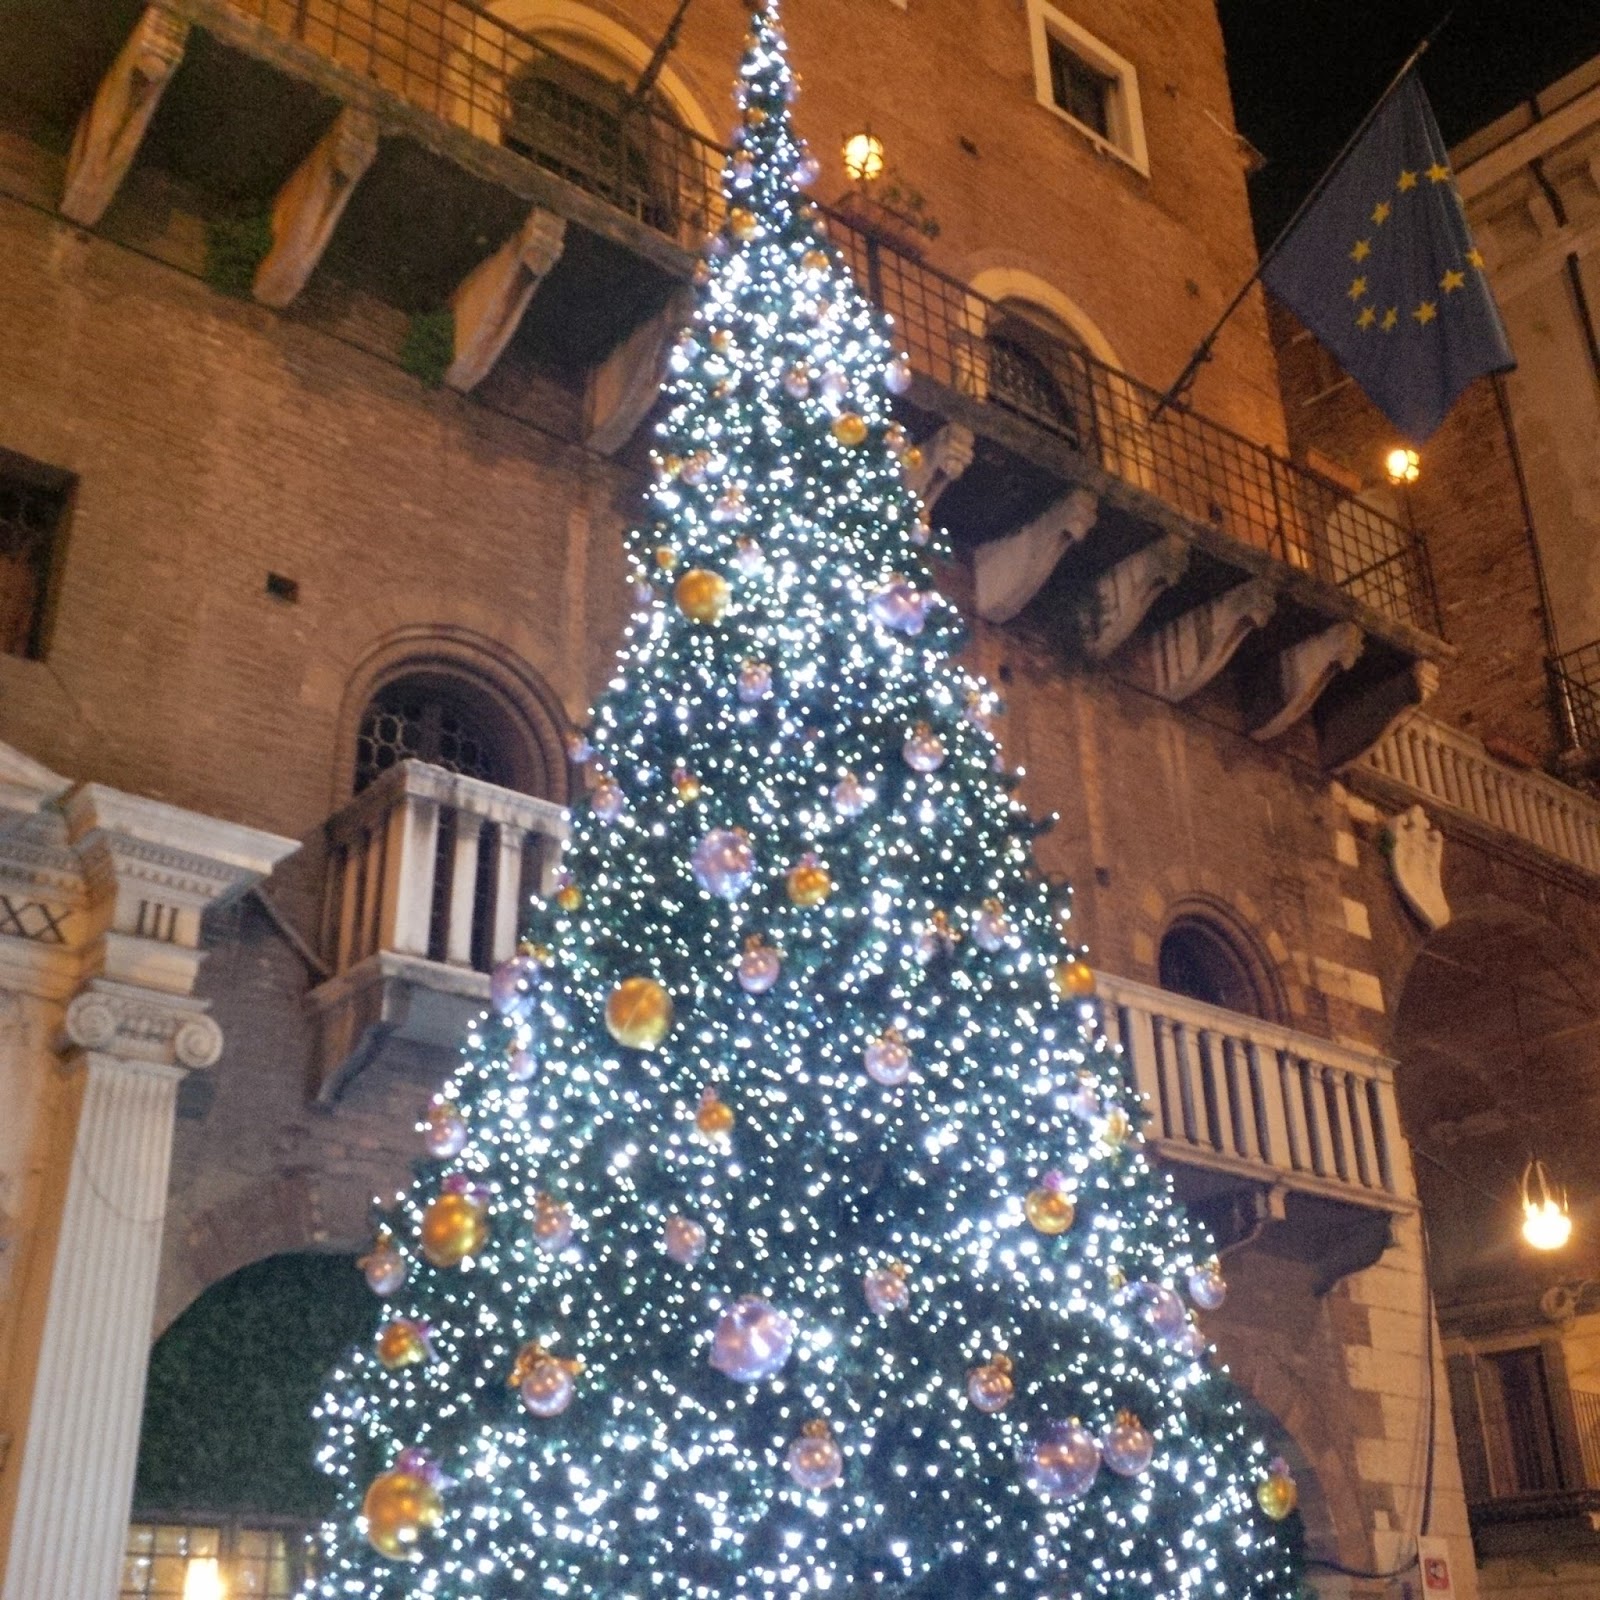 A sparkling Christmas tree at the Christmas market in Verona